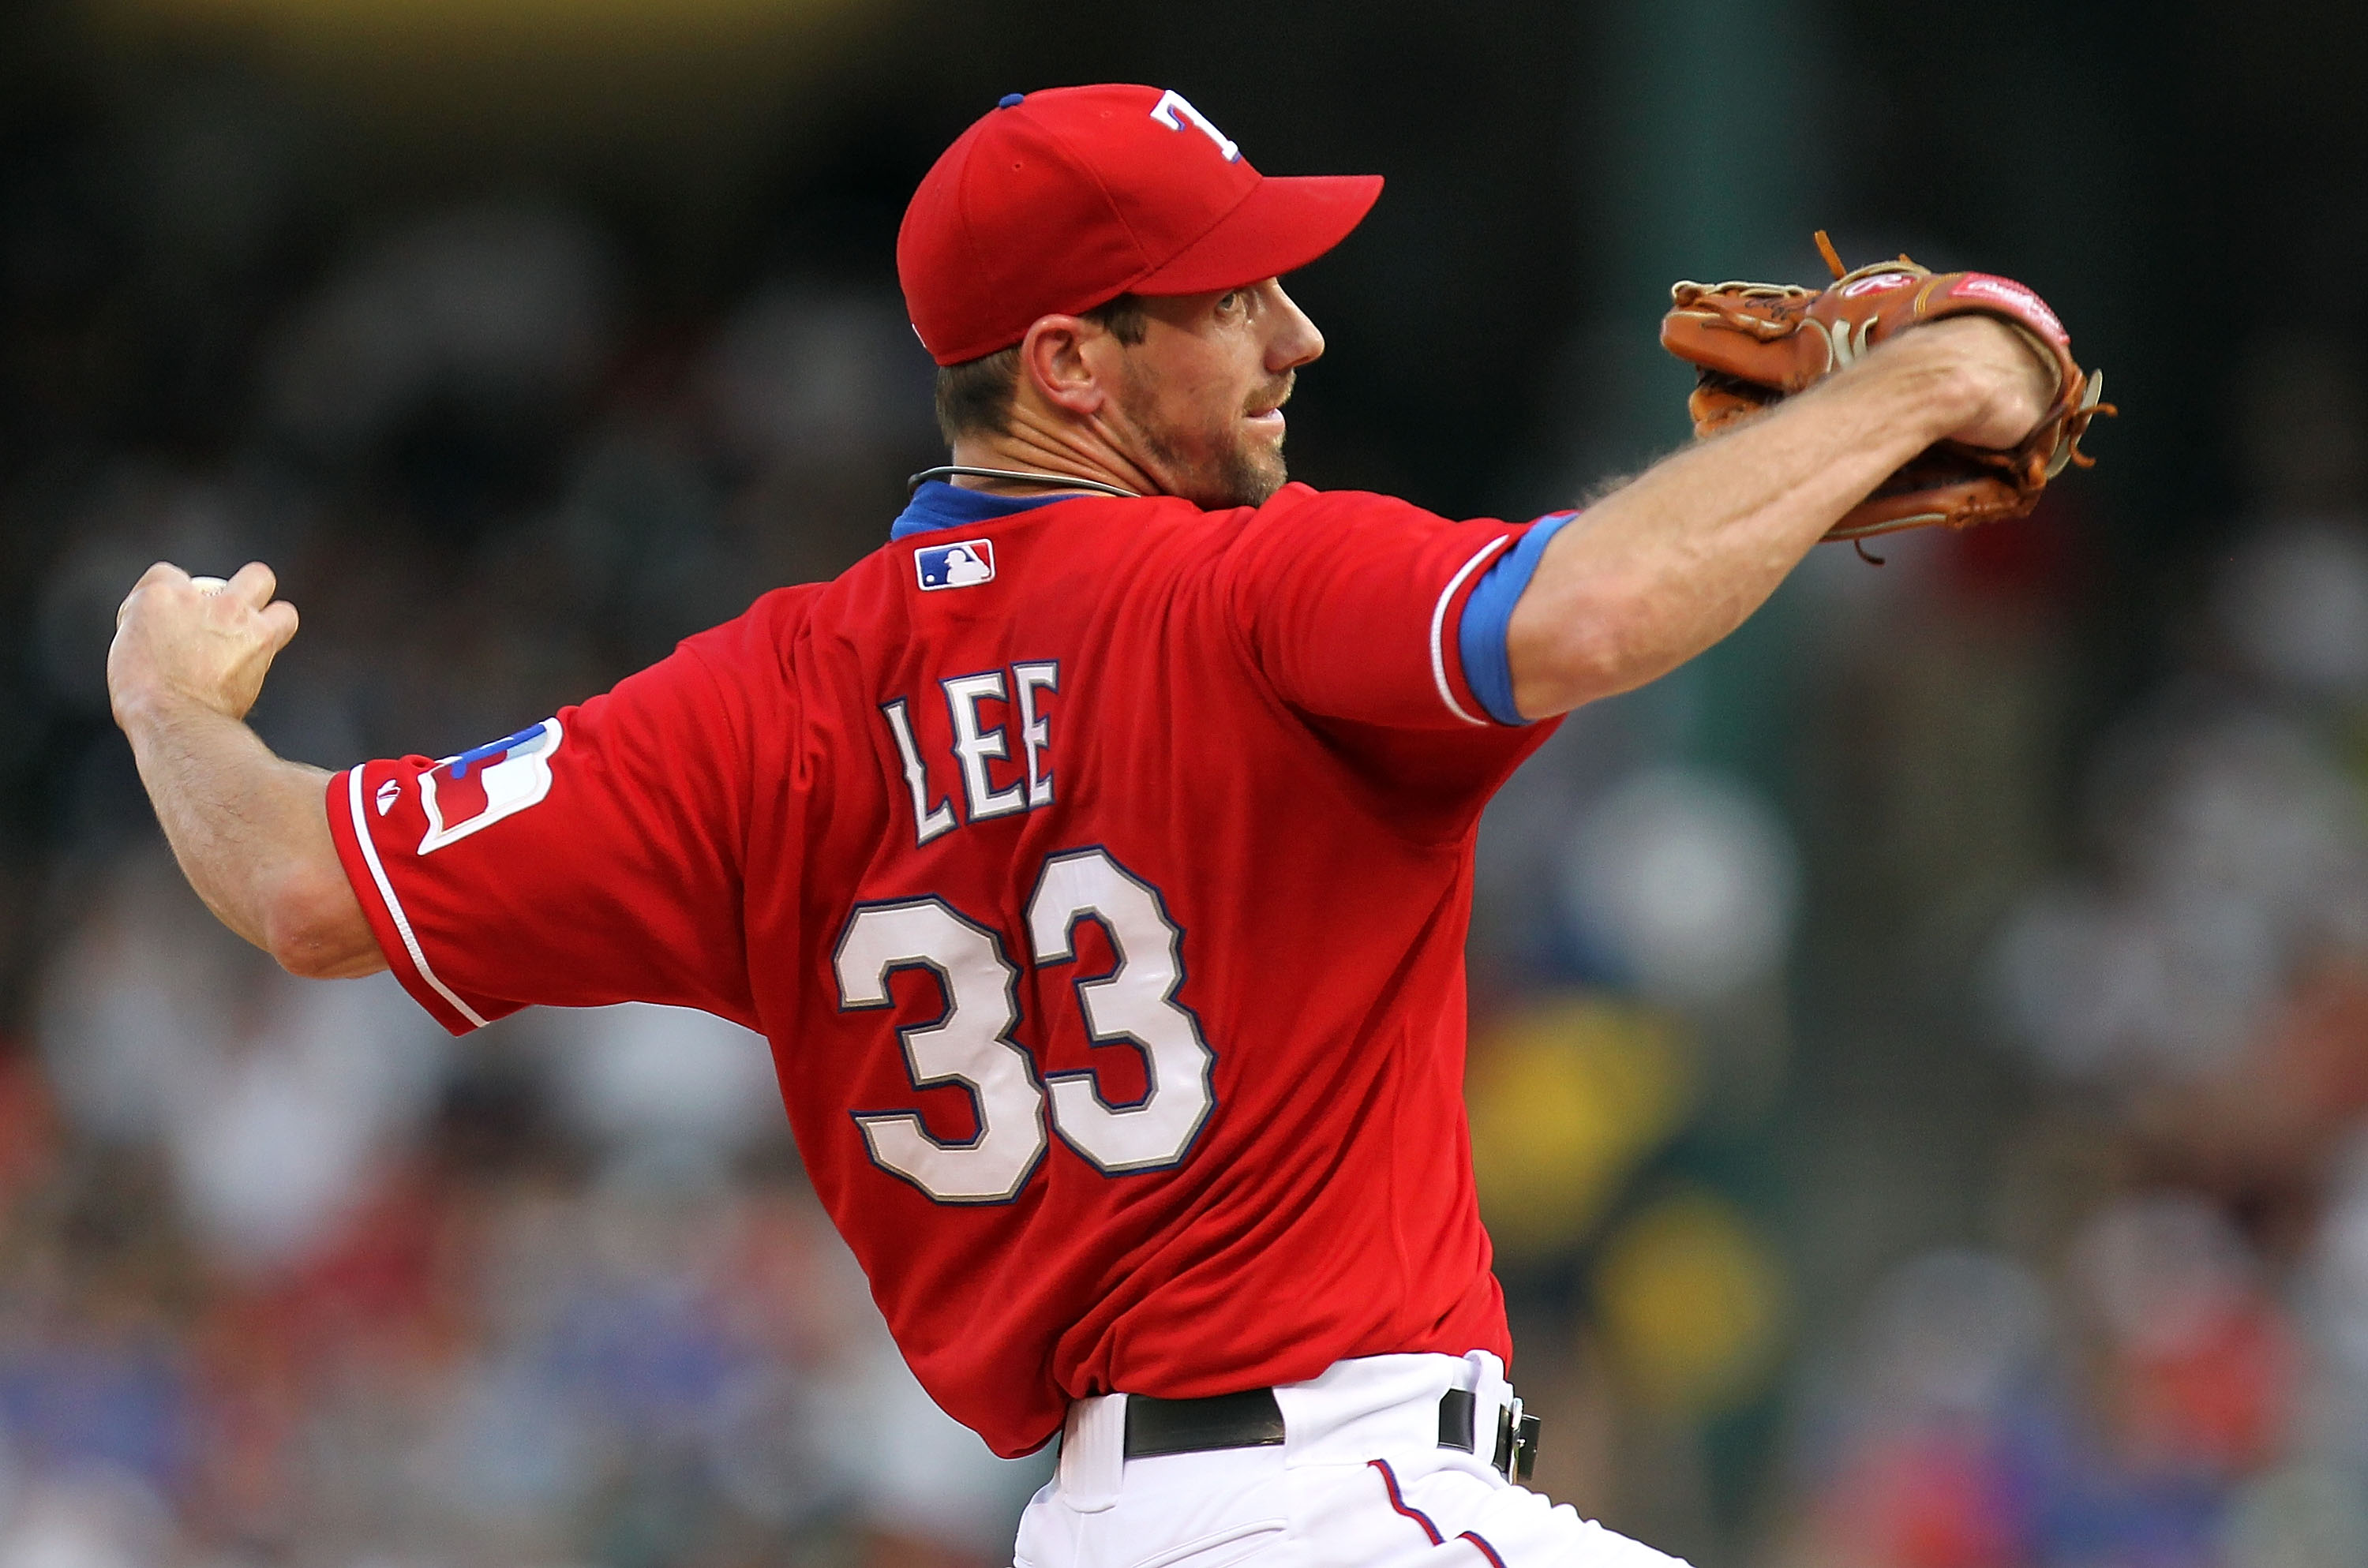 Cliff Lee NOT Traded to the Yankees, but IS now a Ranger